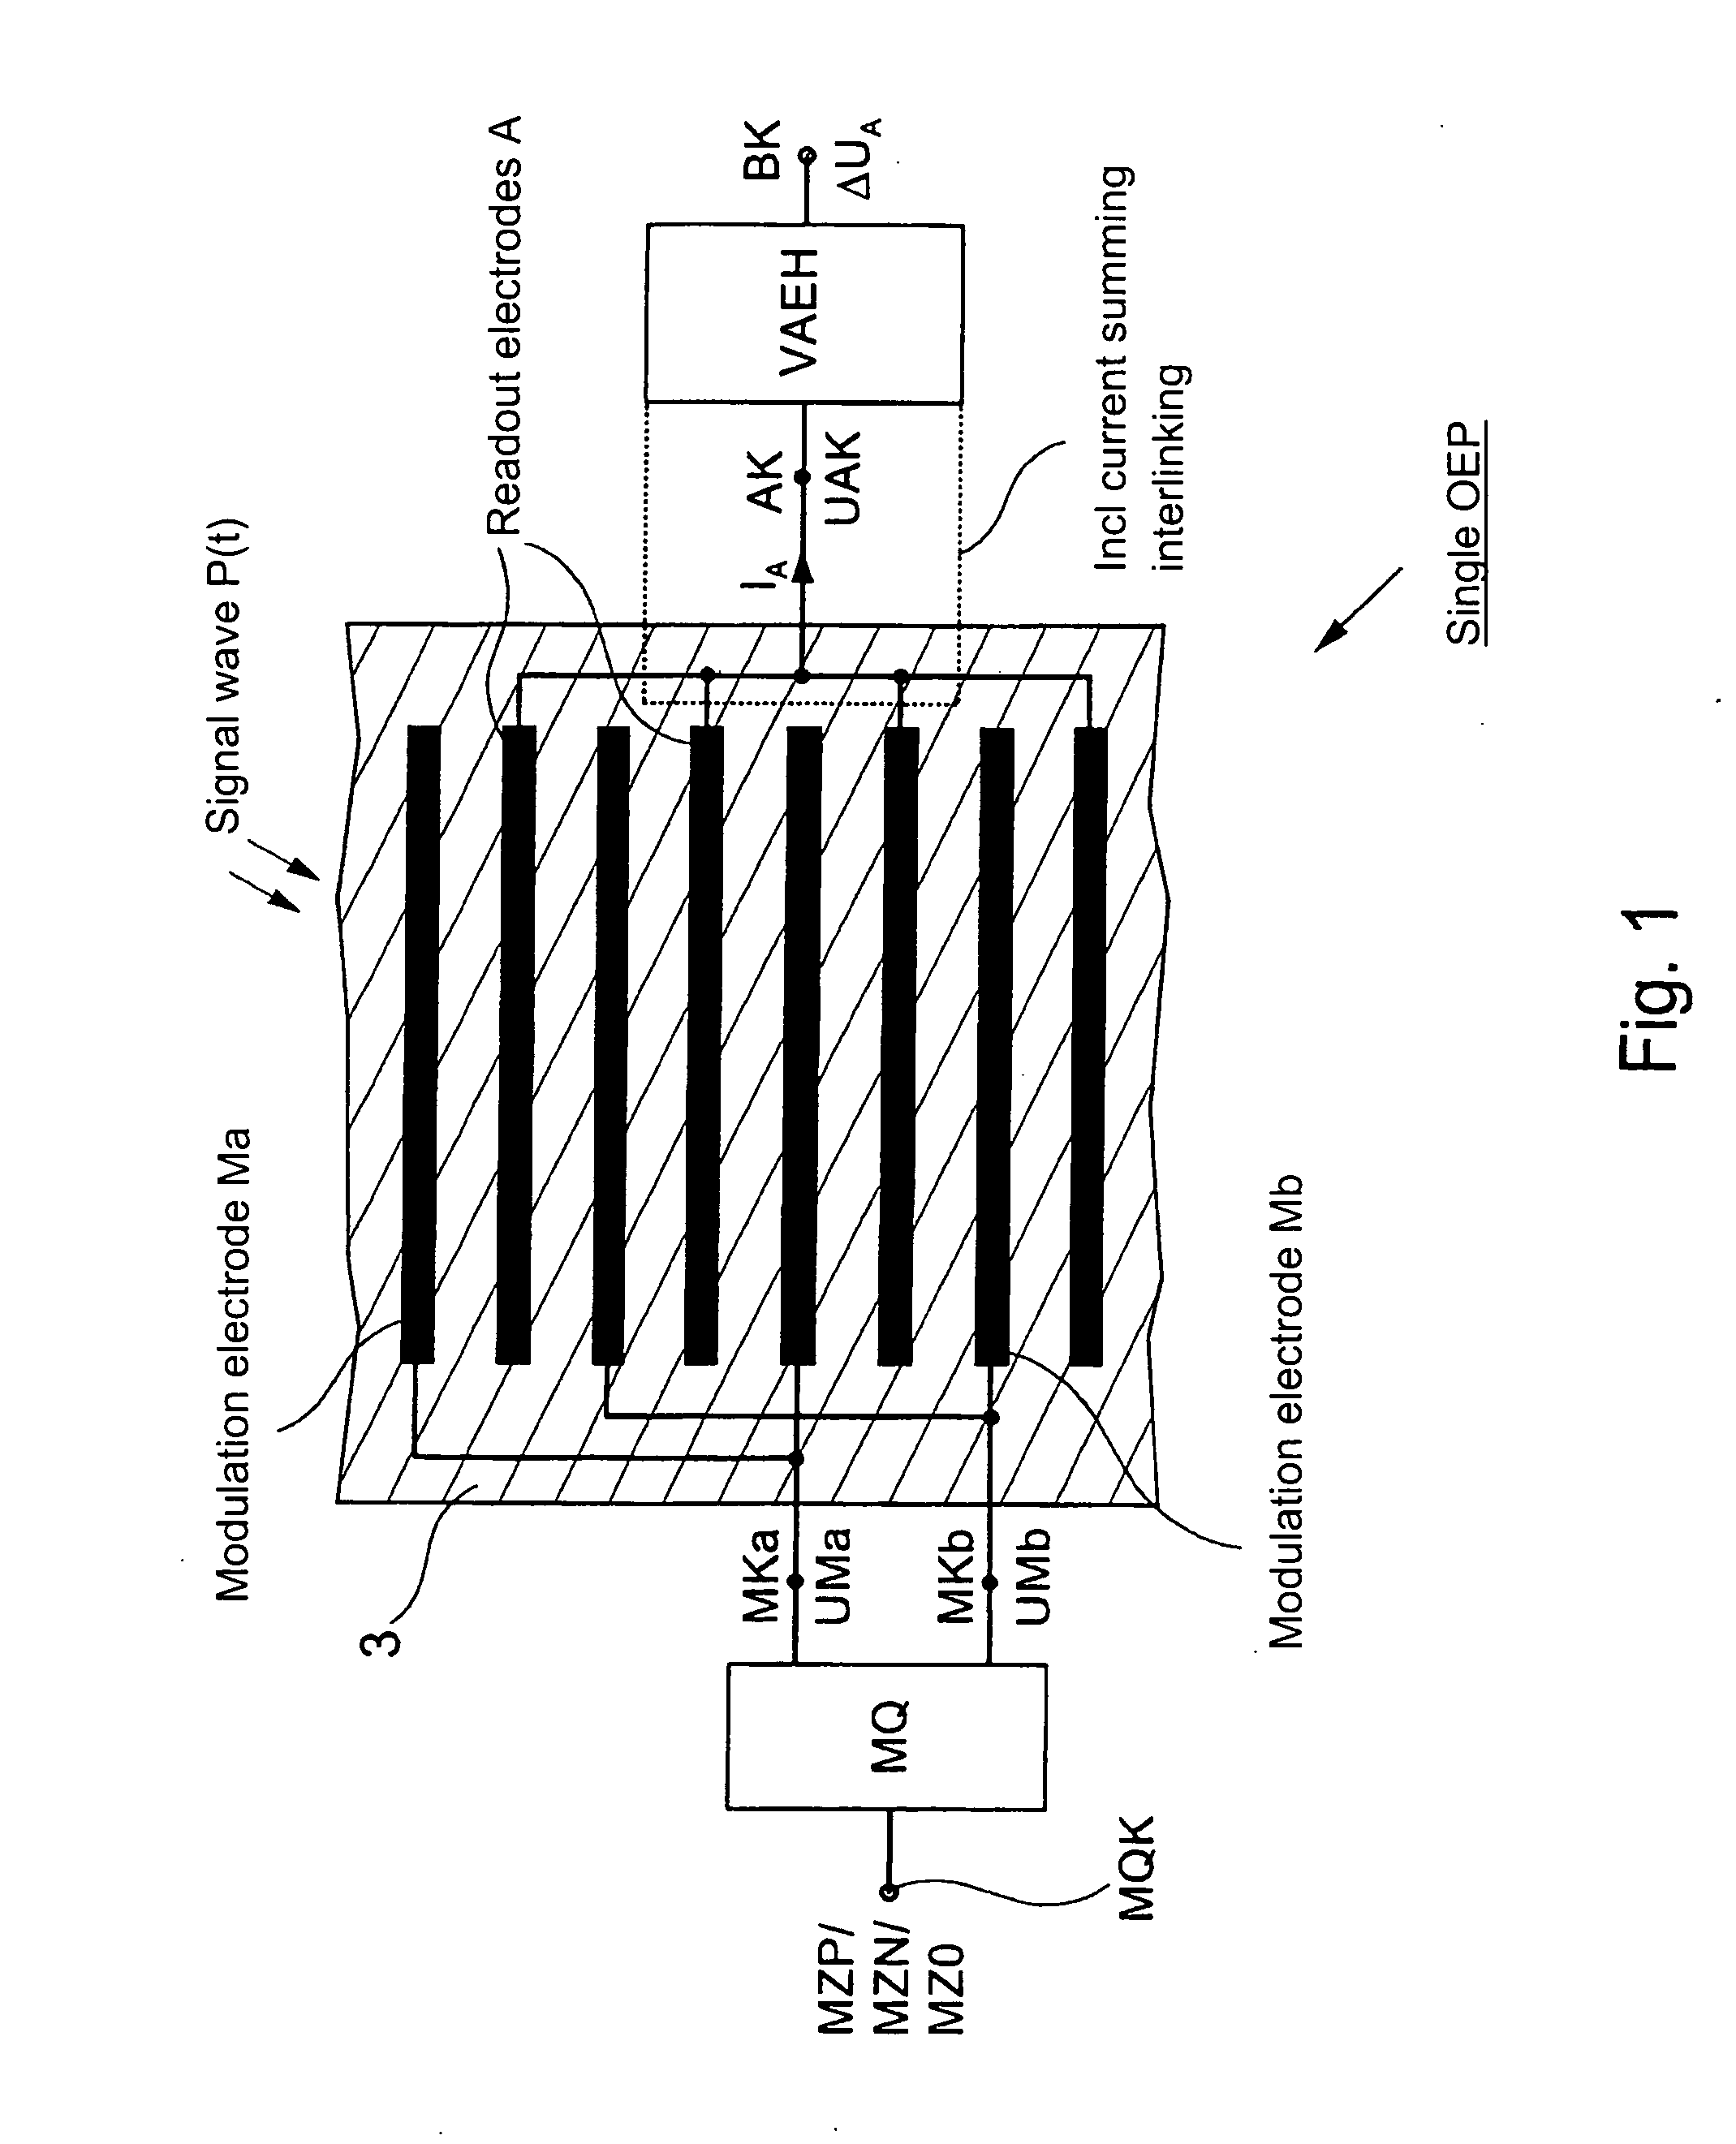 Method and device for detecting and processing electric and optical signals